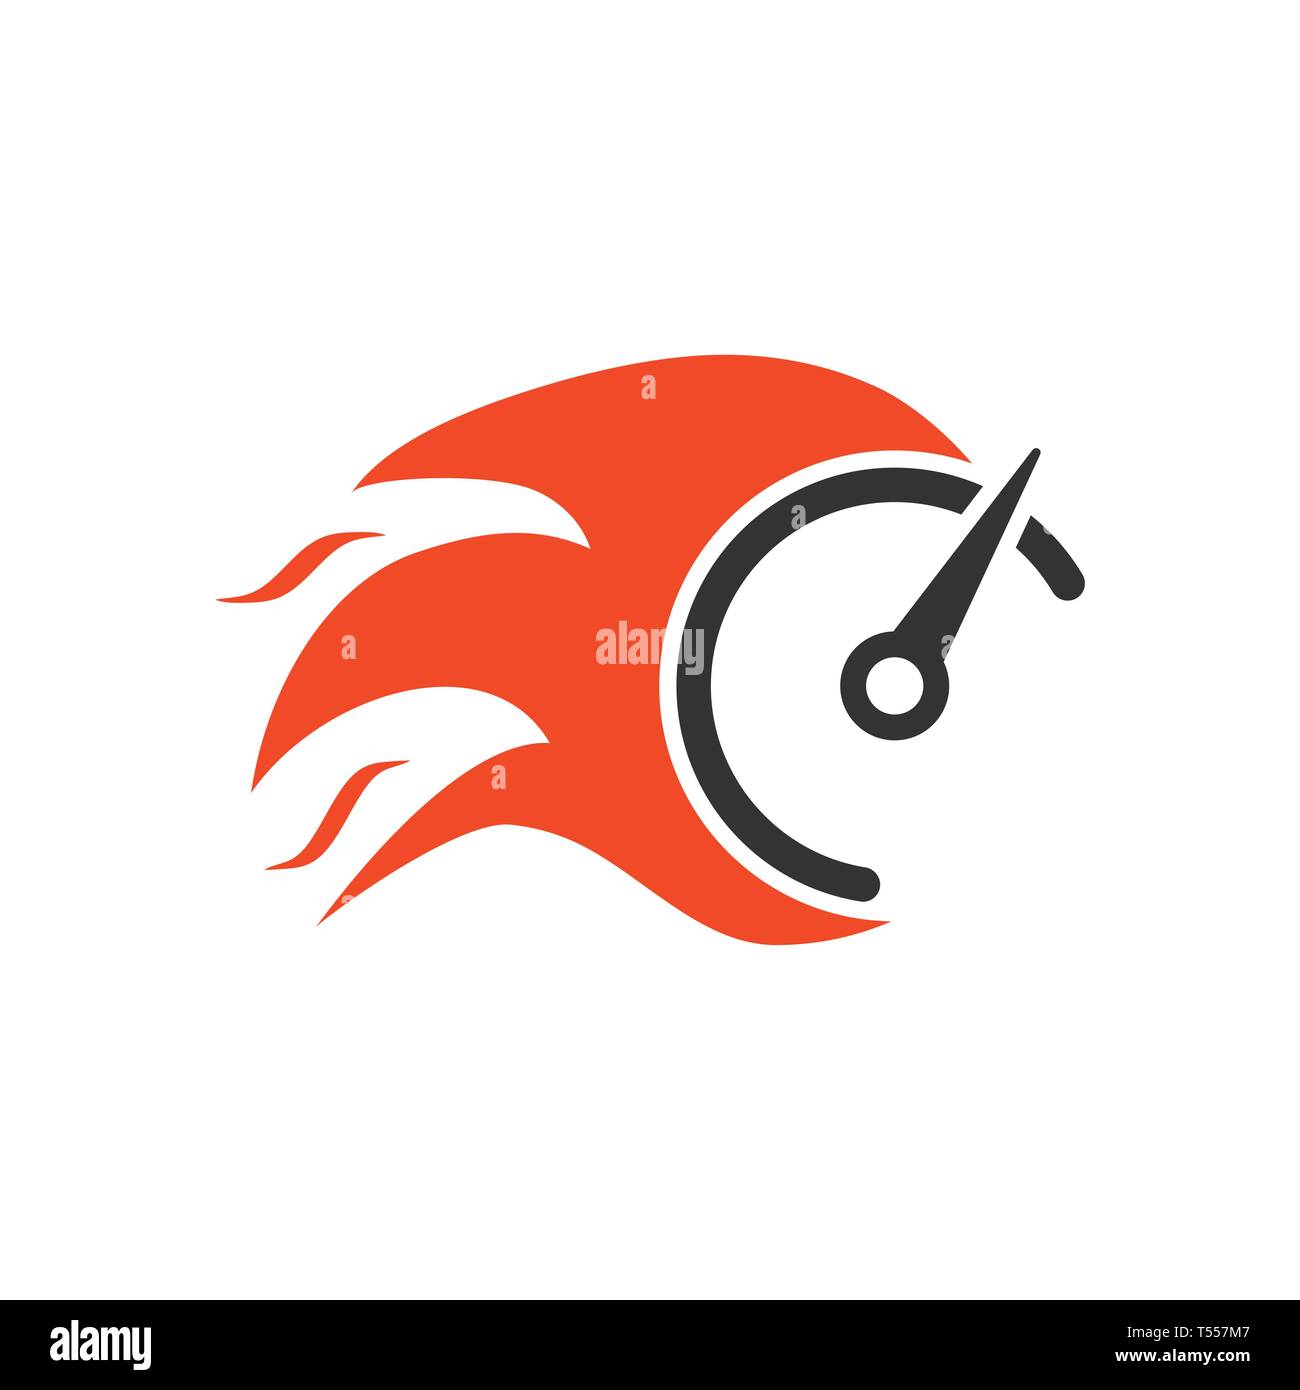 Flaming speedometer sign icon in flat style. Accelerate vector illustration on white isolated background. Motion tachometer business concept. Stock Vector